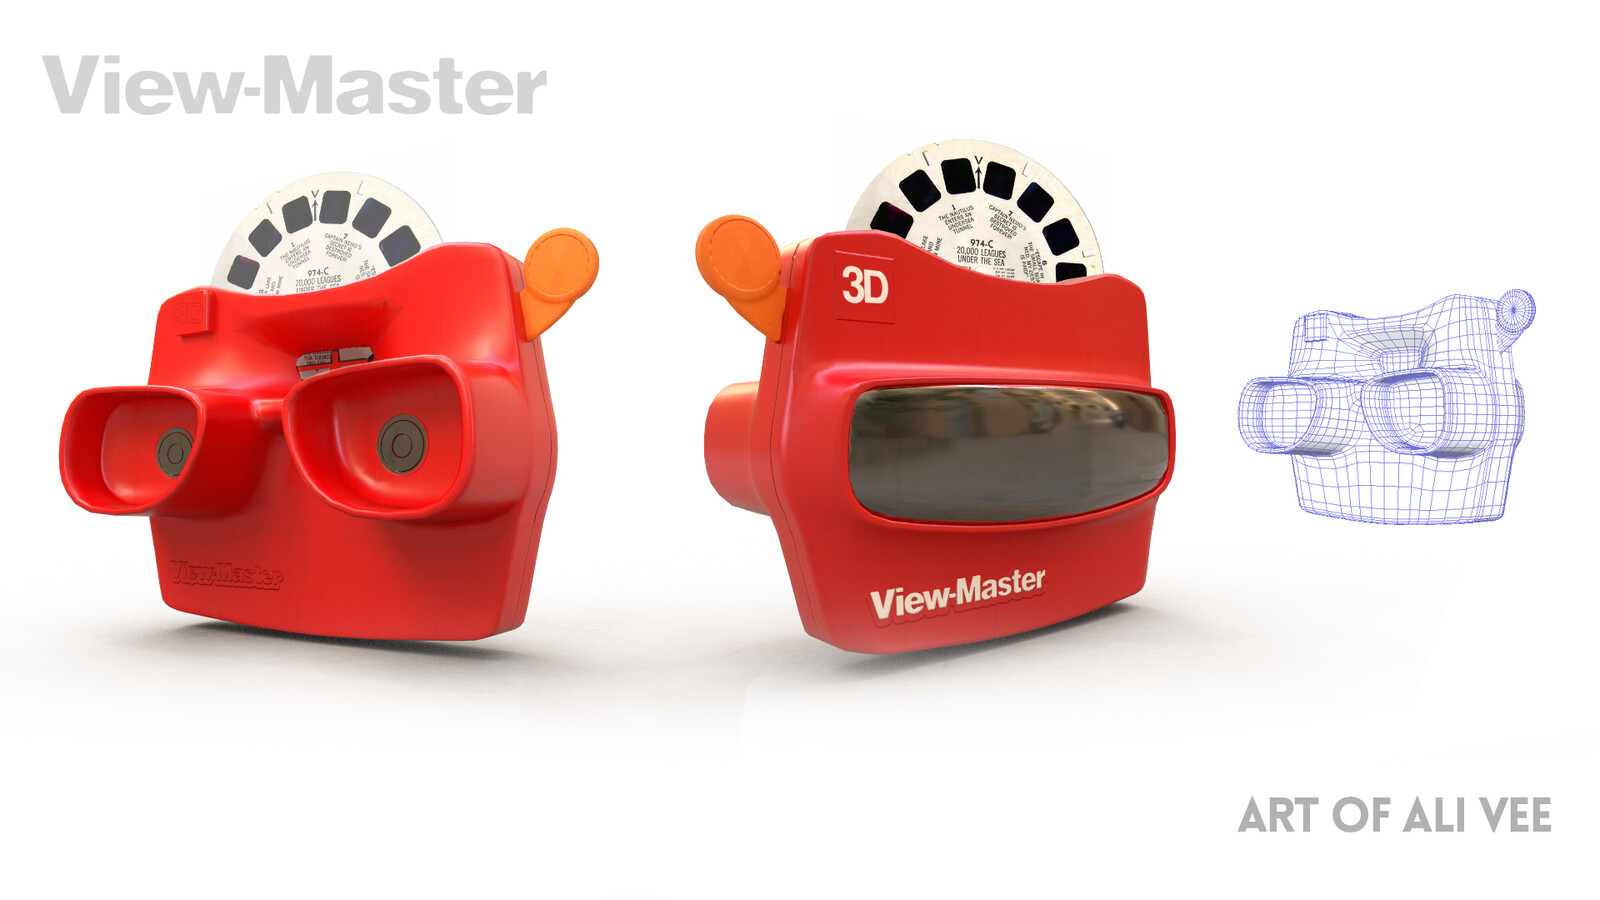 3D Viewmaster